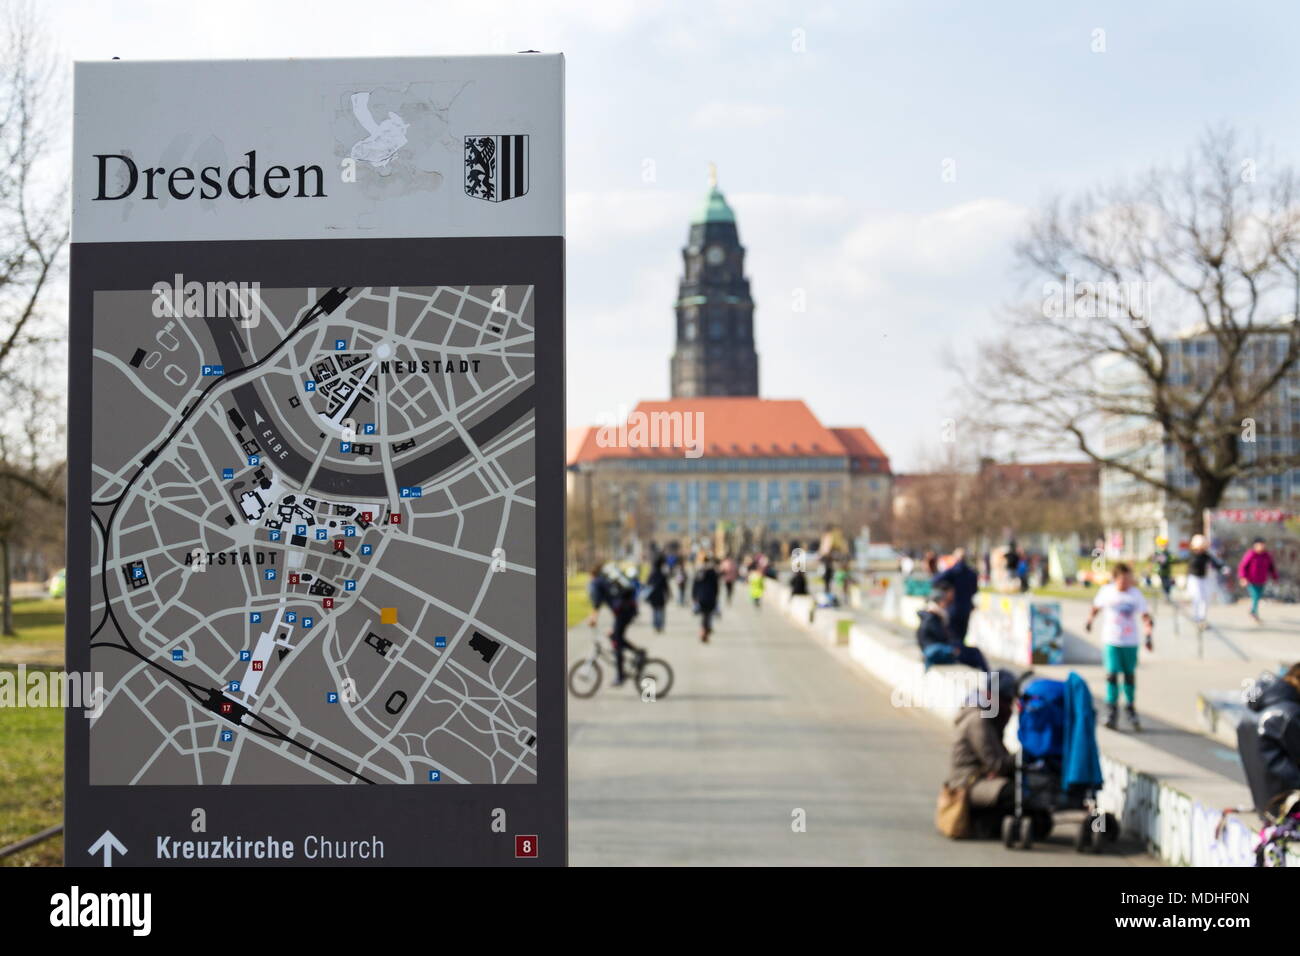 Dresden map in Lingnerallee skatepark with City Hall in background Stock Photo